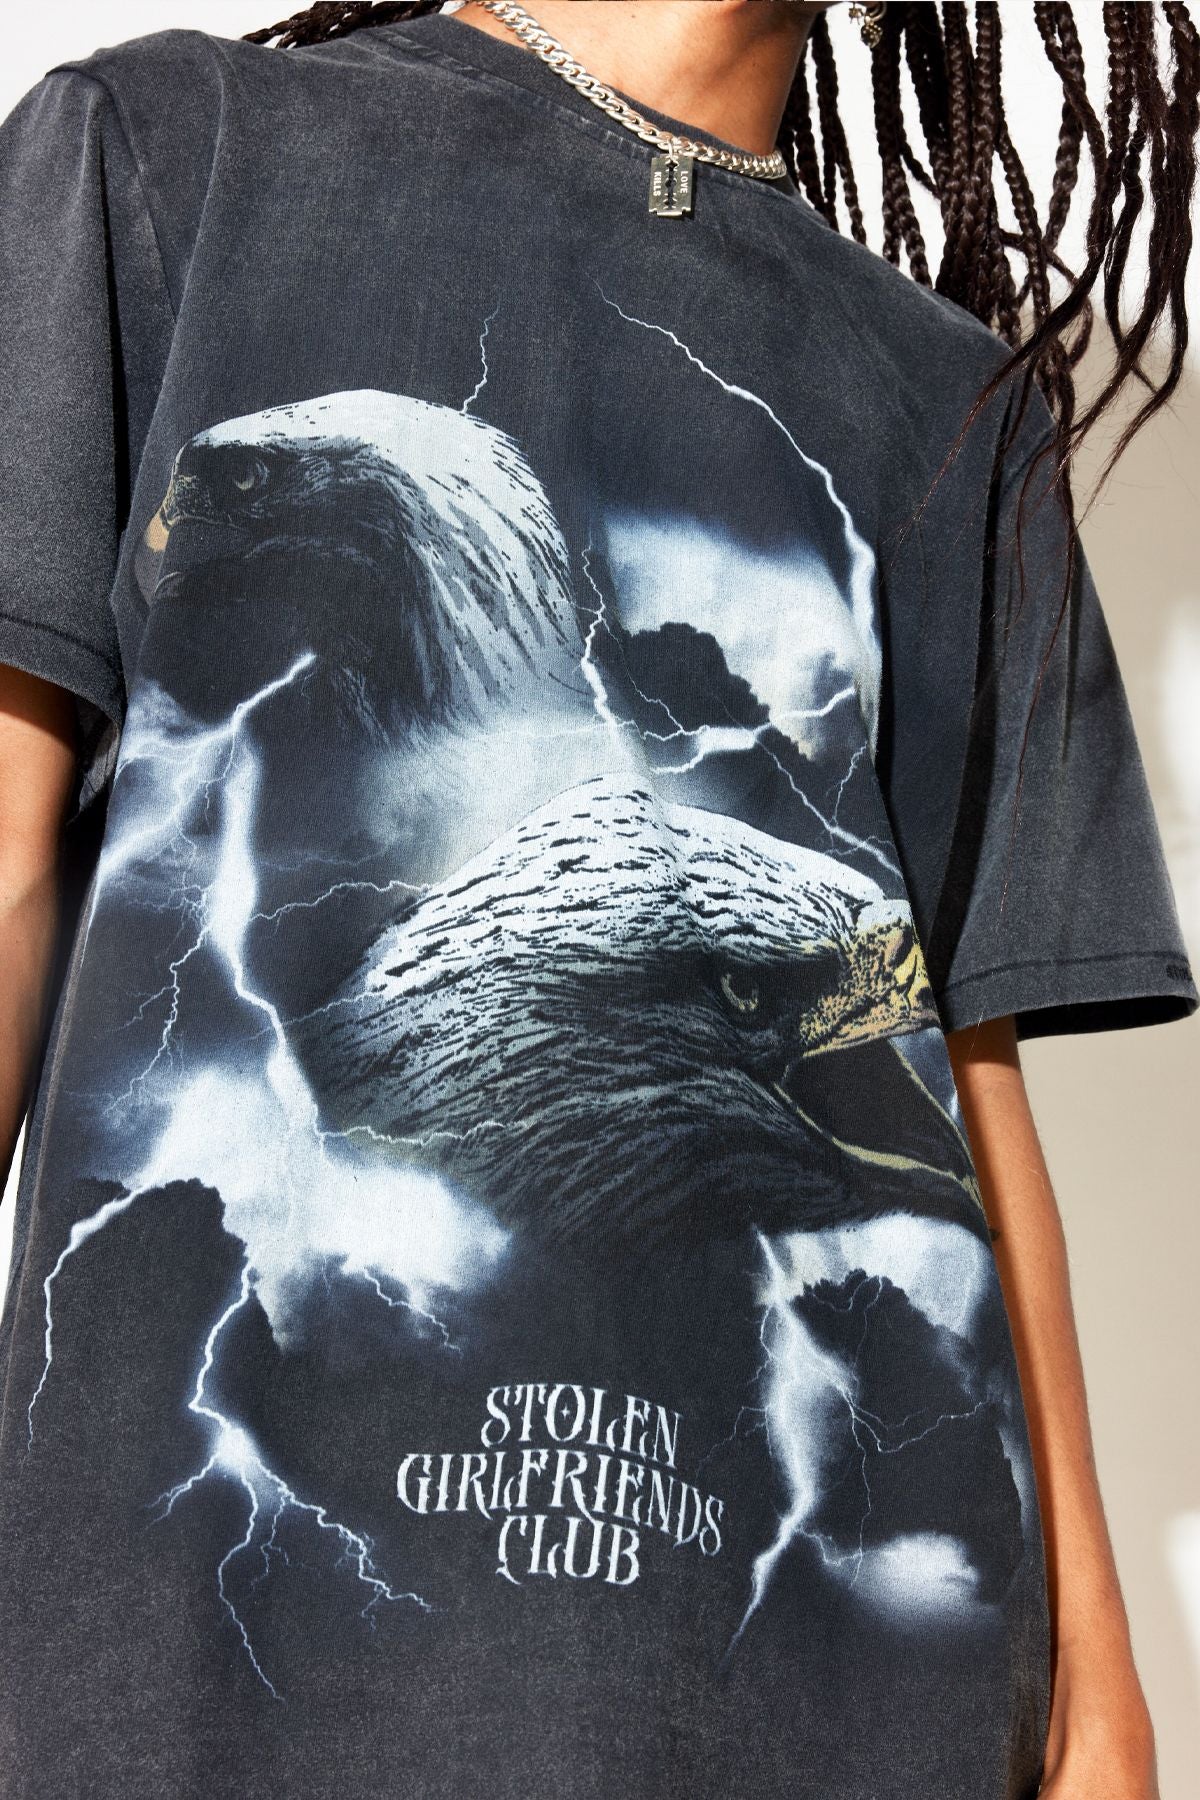 STOLEN GIRLFRIENDS CLUB // Eagle Dreams Tee AGED CHARCOAL